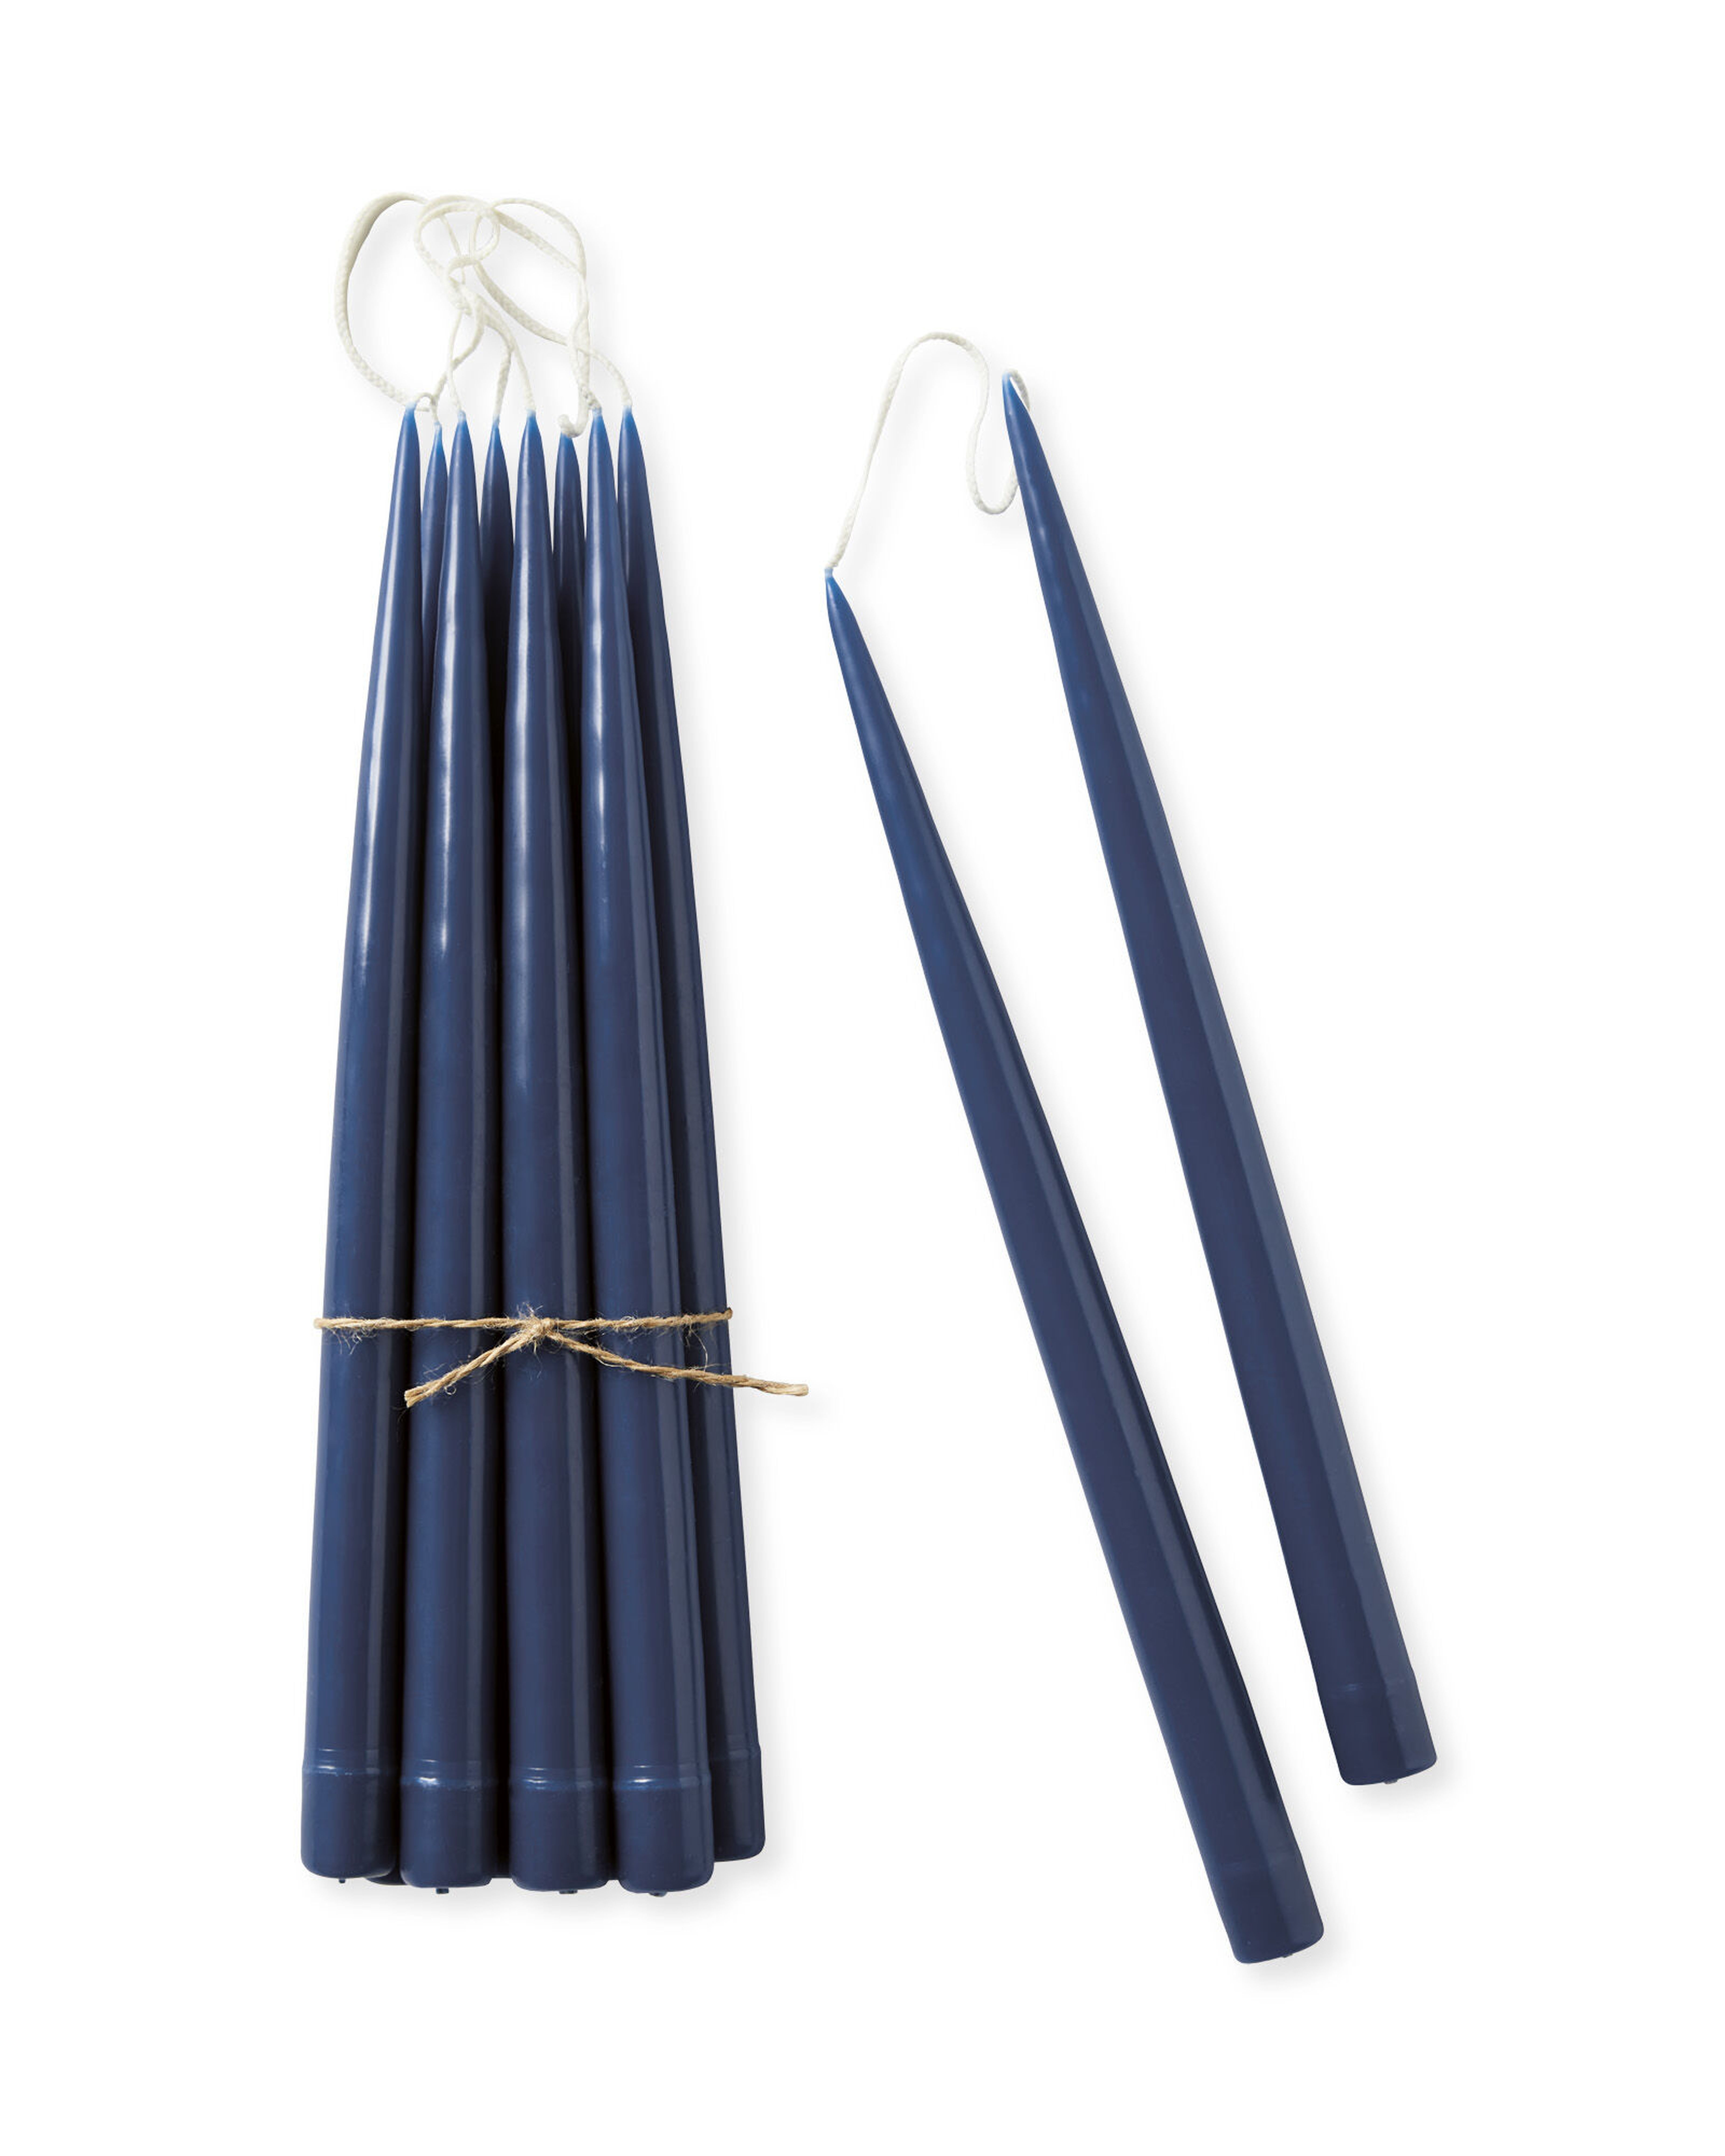 Tapered Candles (Set of 10) - Serena and Lily